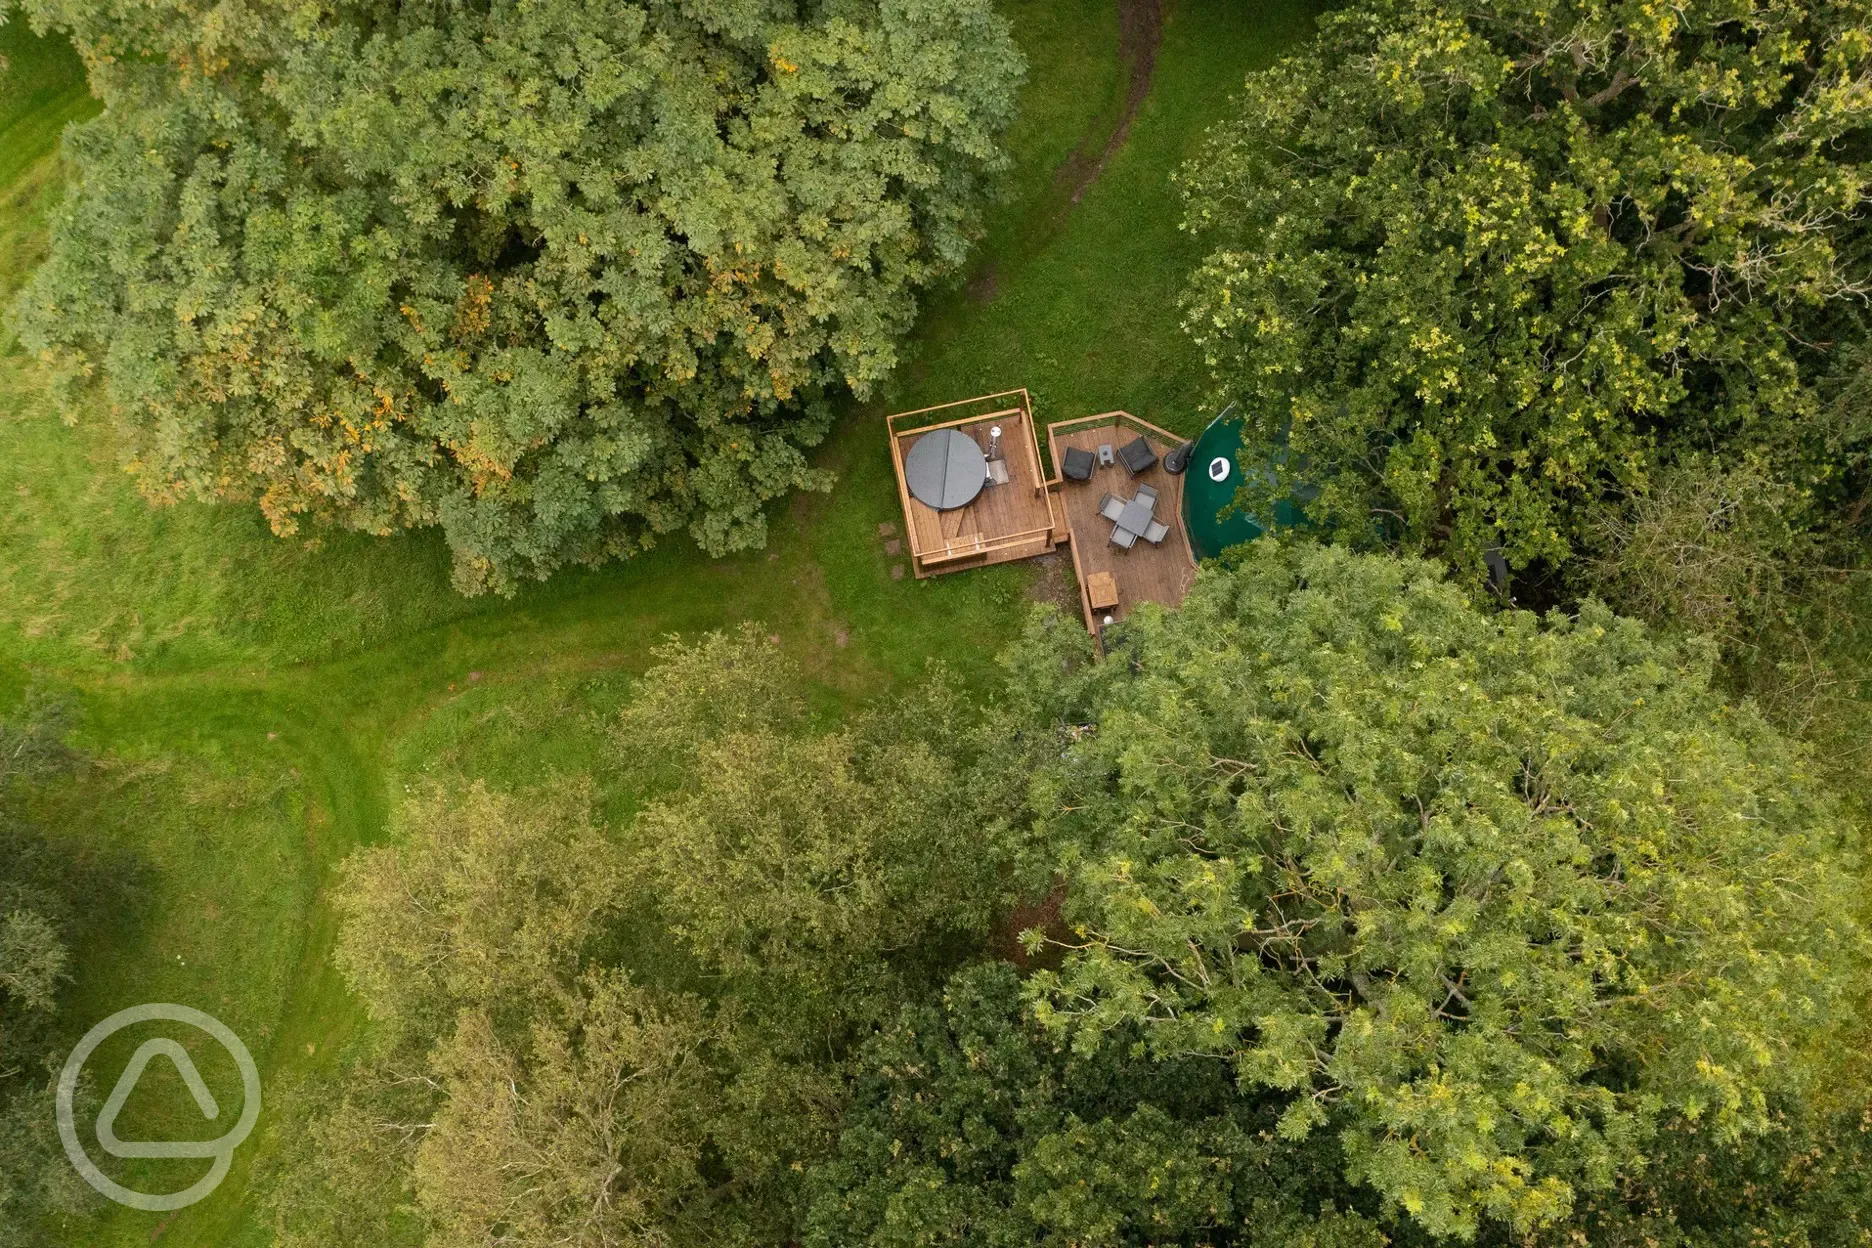 Birdseye view of glamping dome